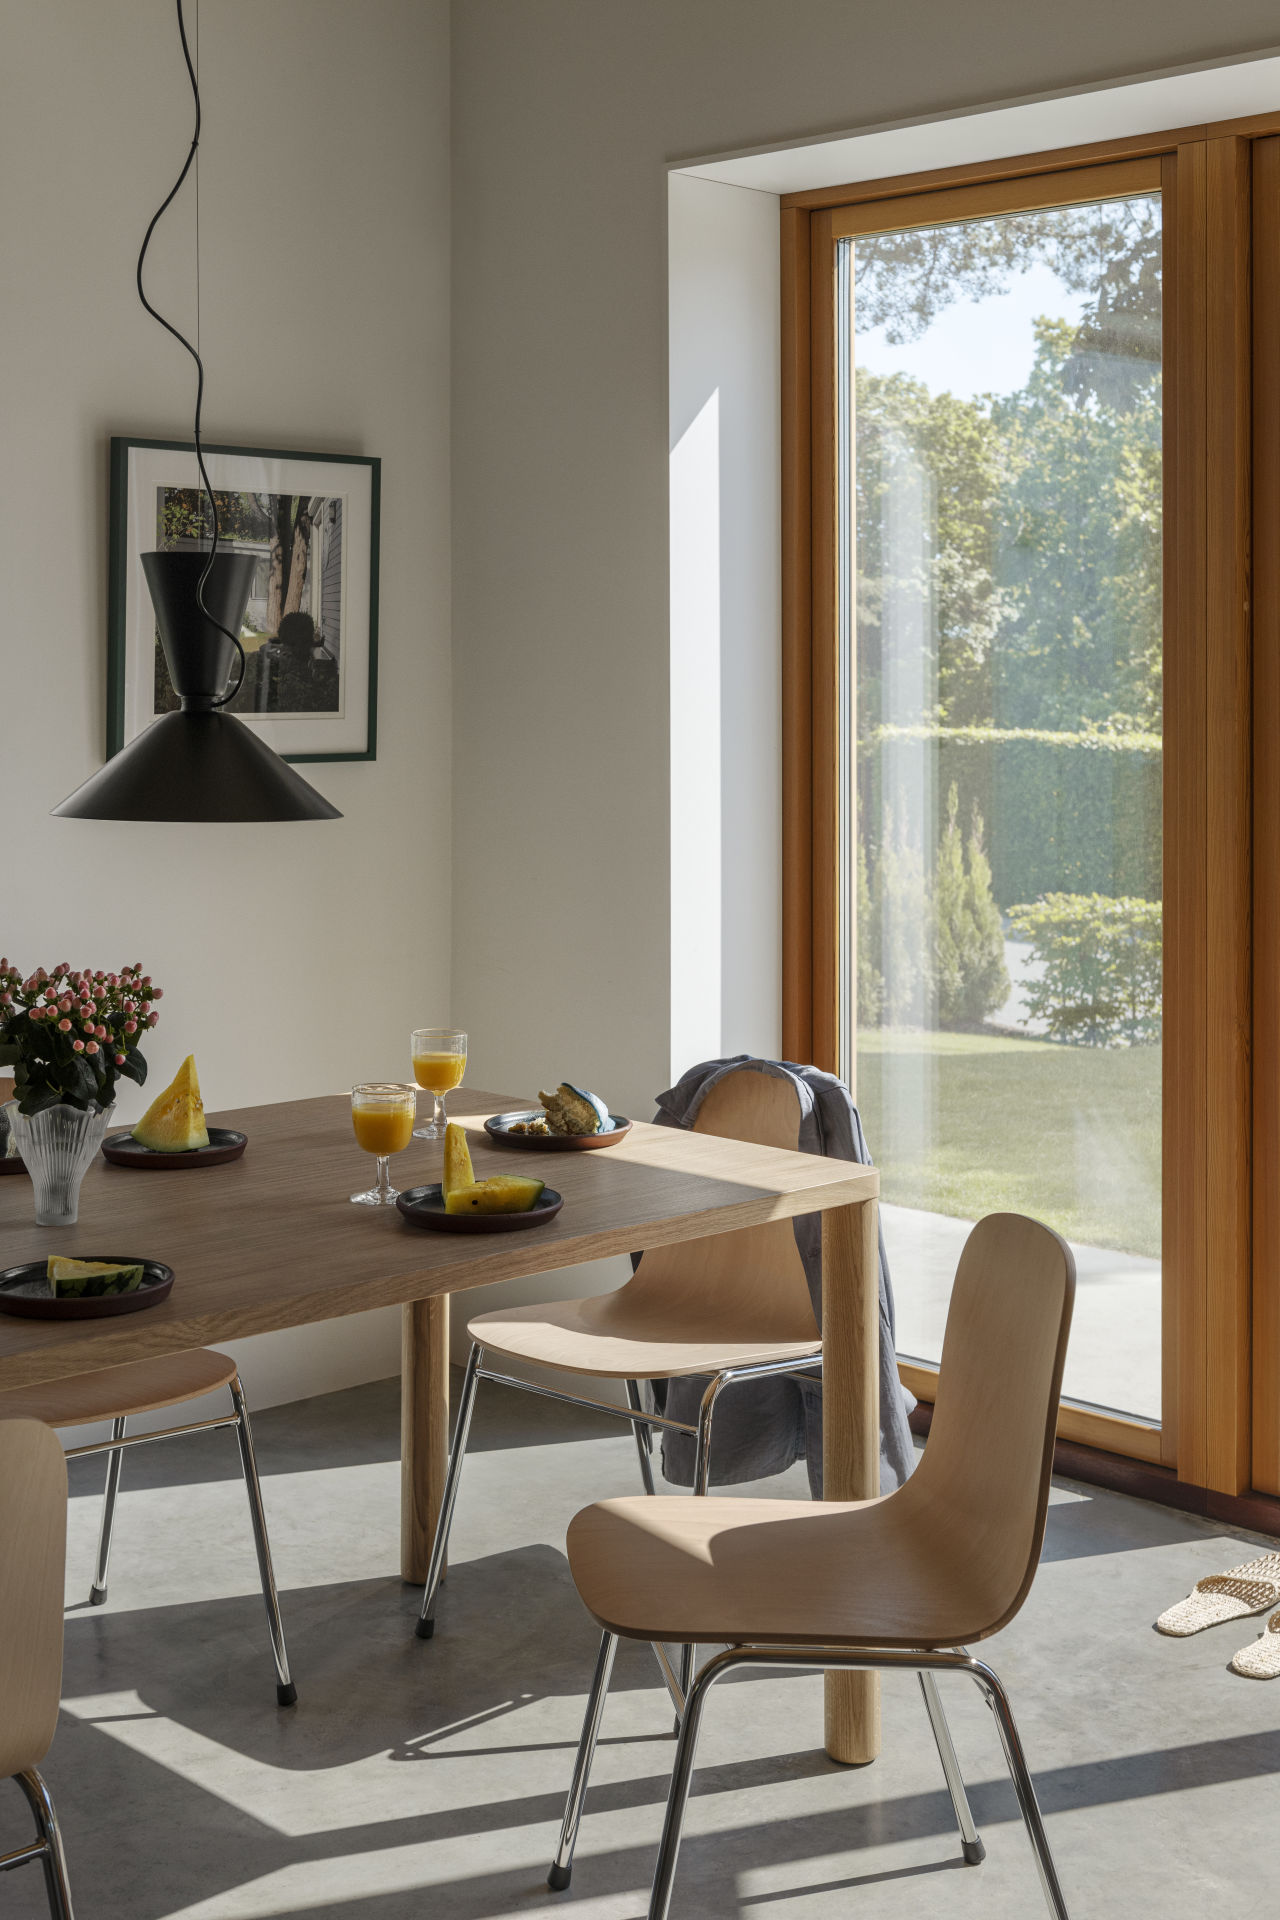 A lifestyle image of a dining / kitchen scene featuring Alphabeta Pendant Light, Log Table and Touchwood Chairs.